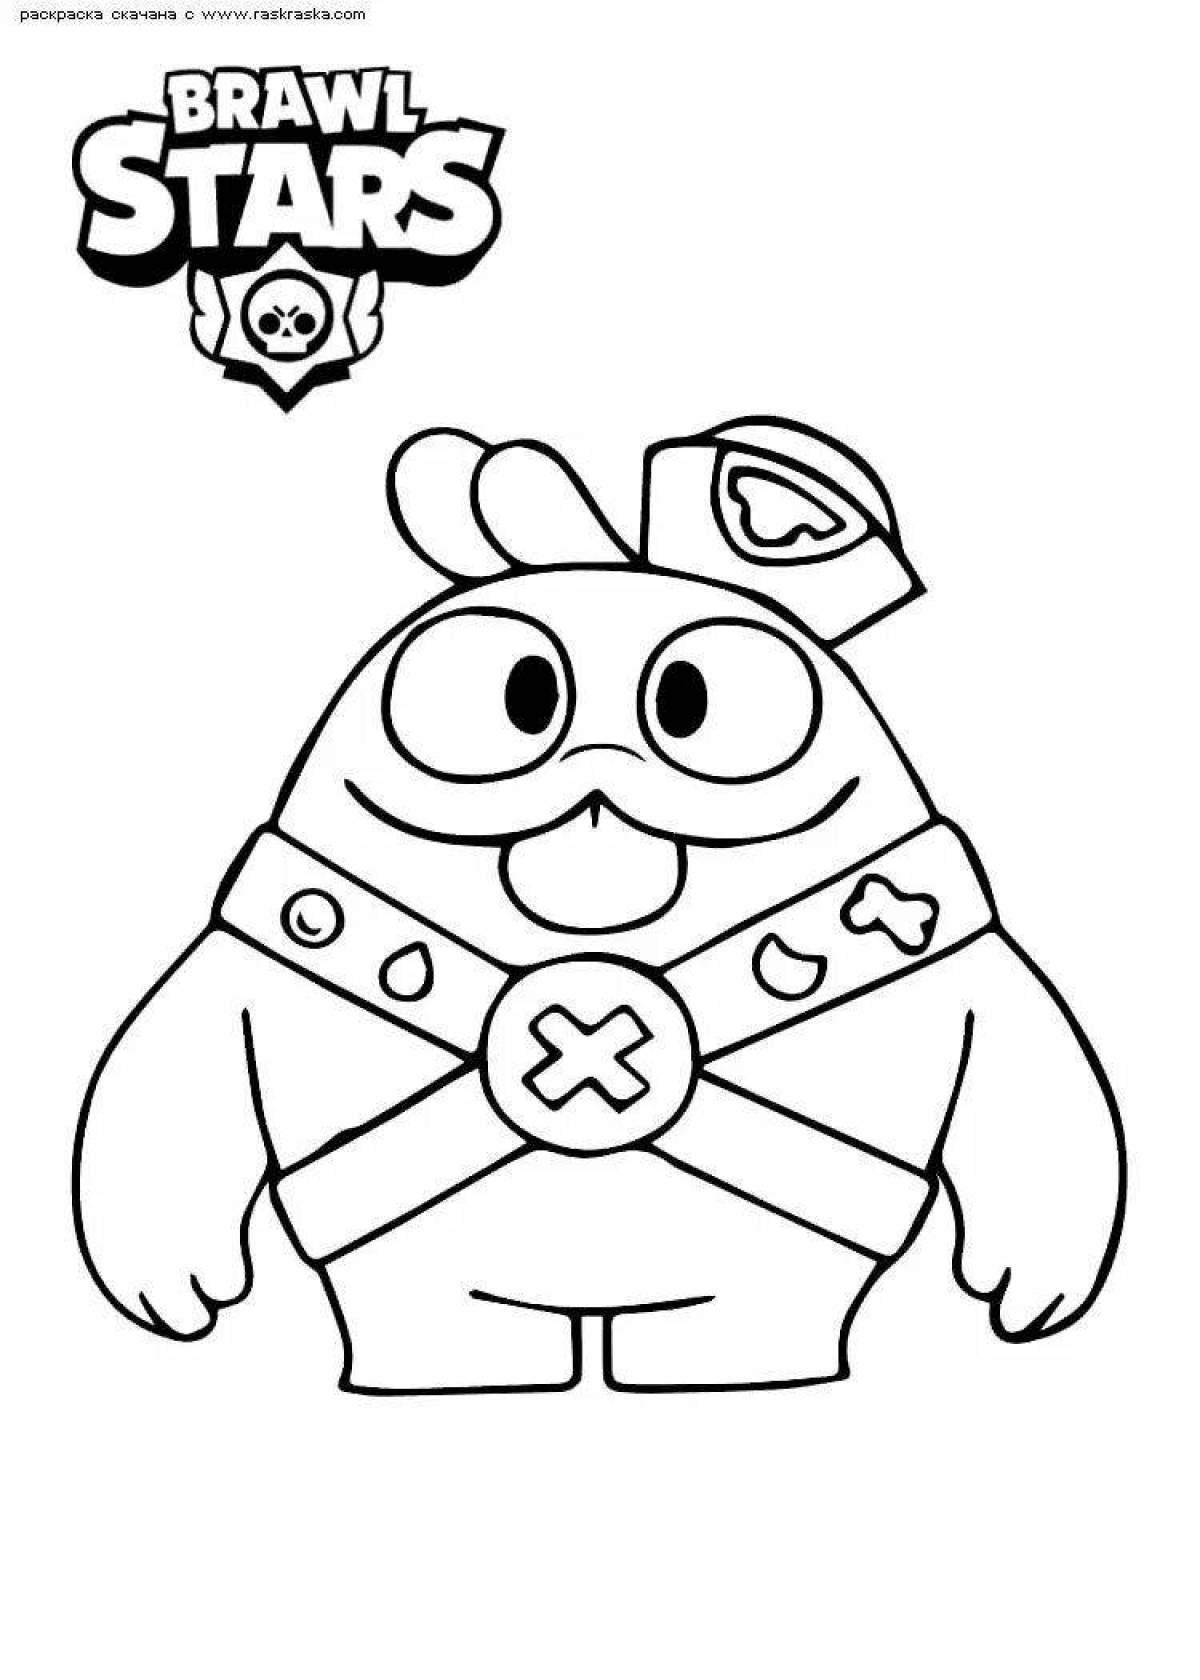 Great squick coloring page